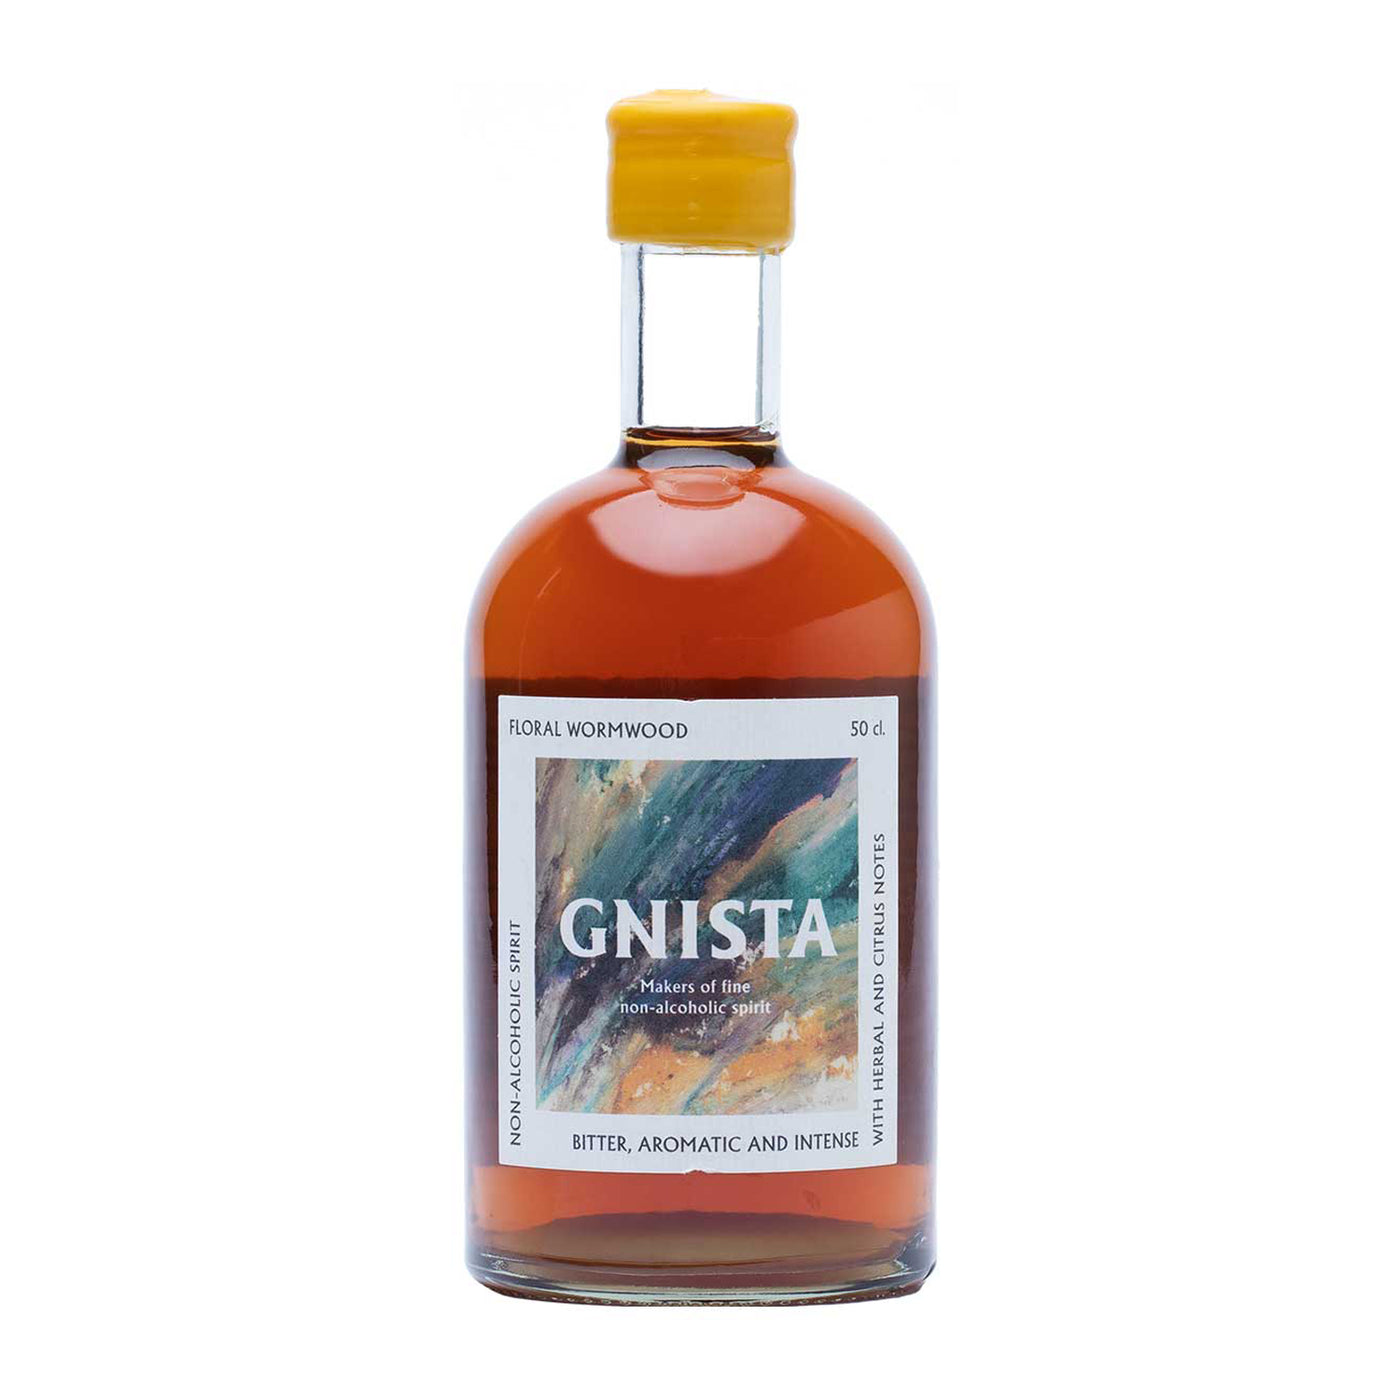 Gnista Floral Wormwood non-alcoholic spirit